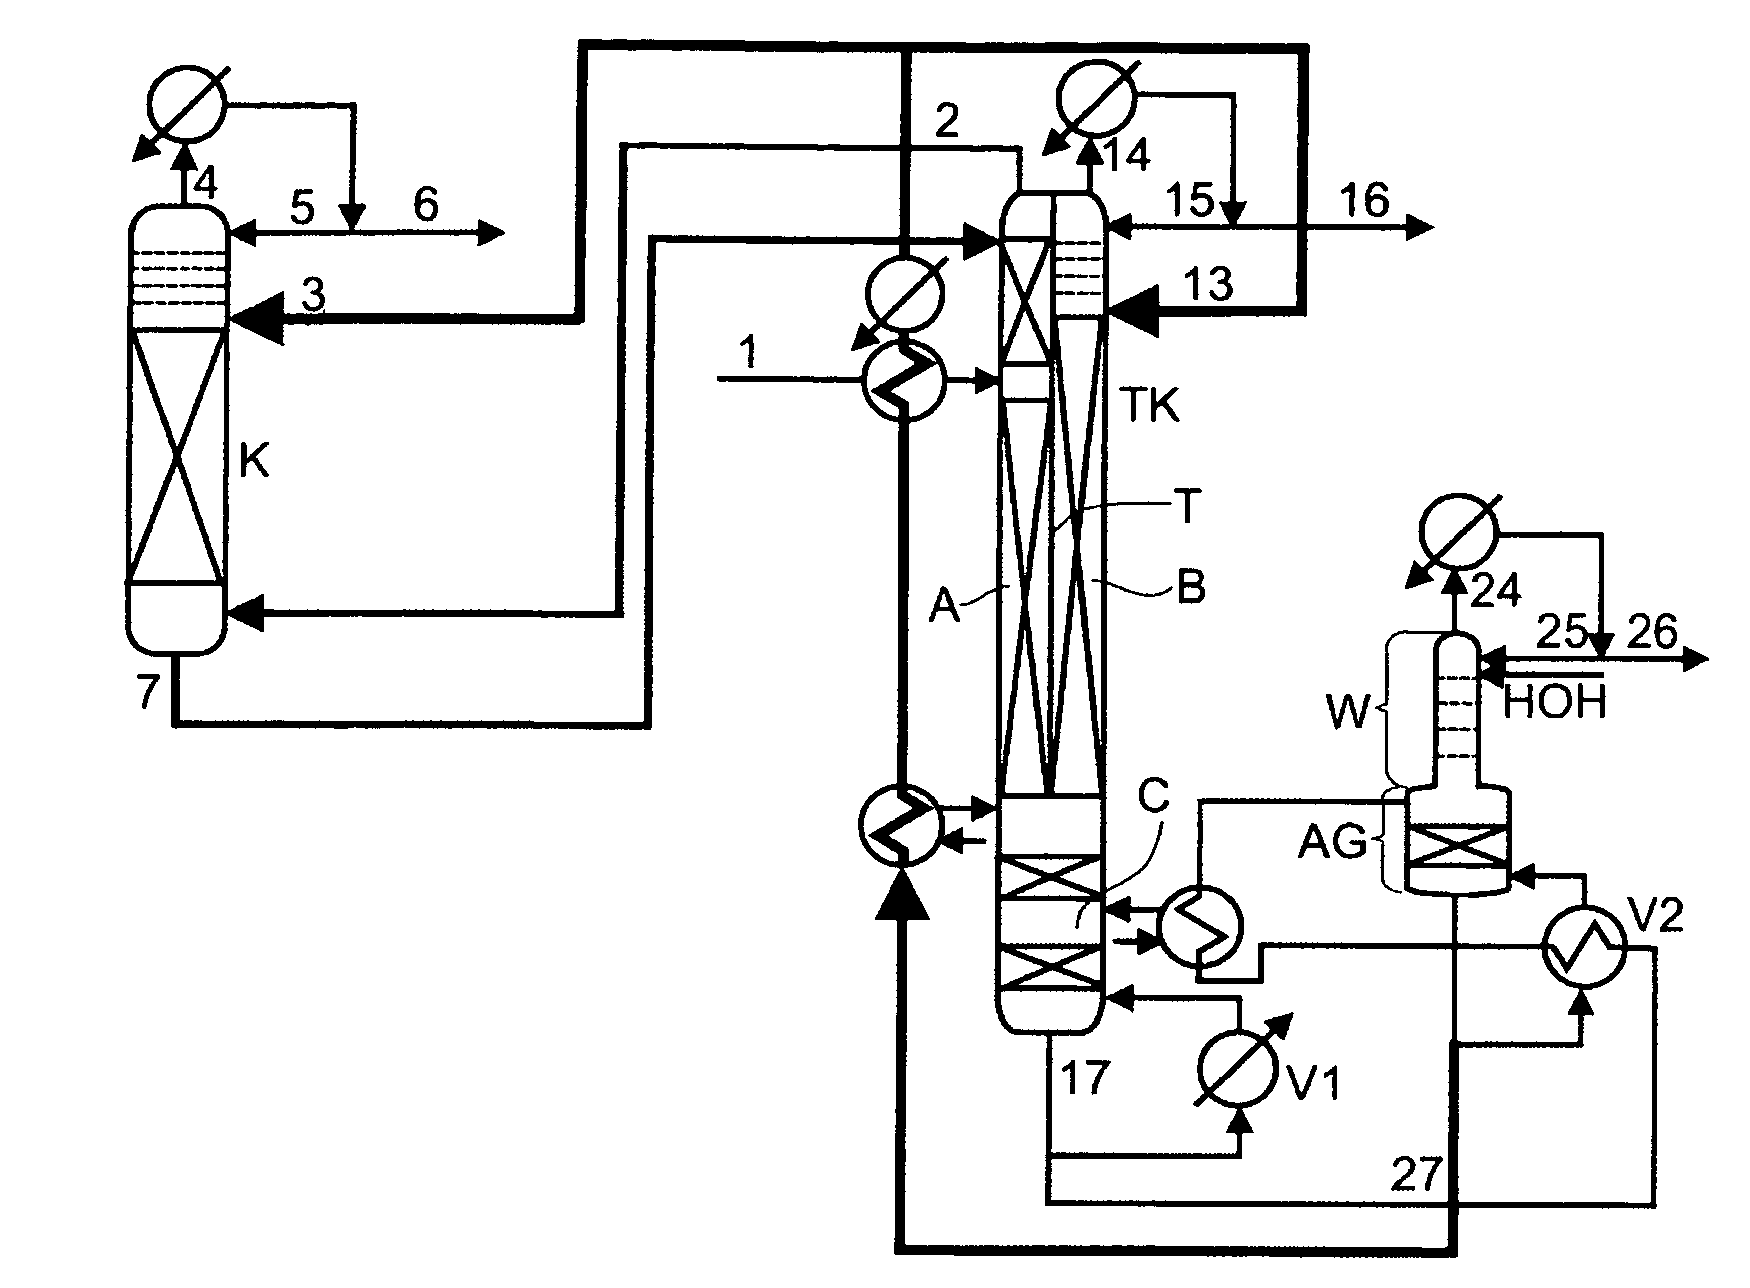 Process for obtaining crude 1,3-butadiene from a C4 cut